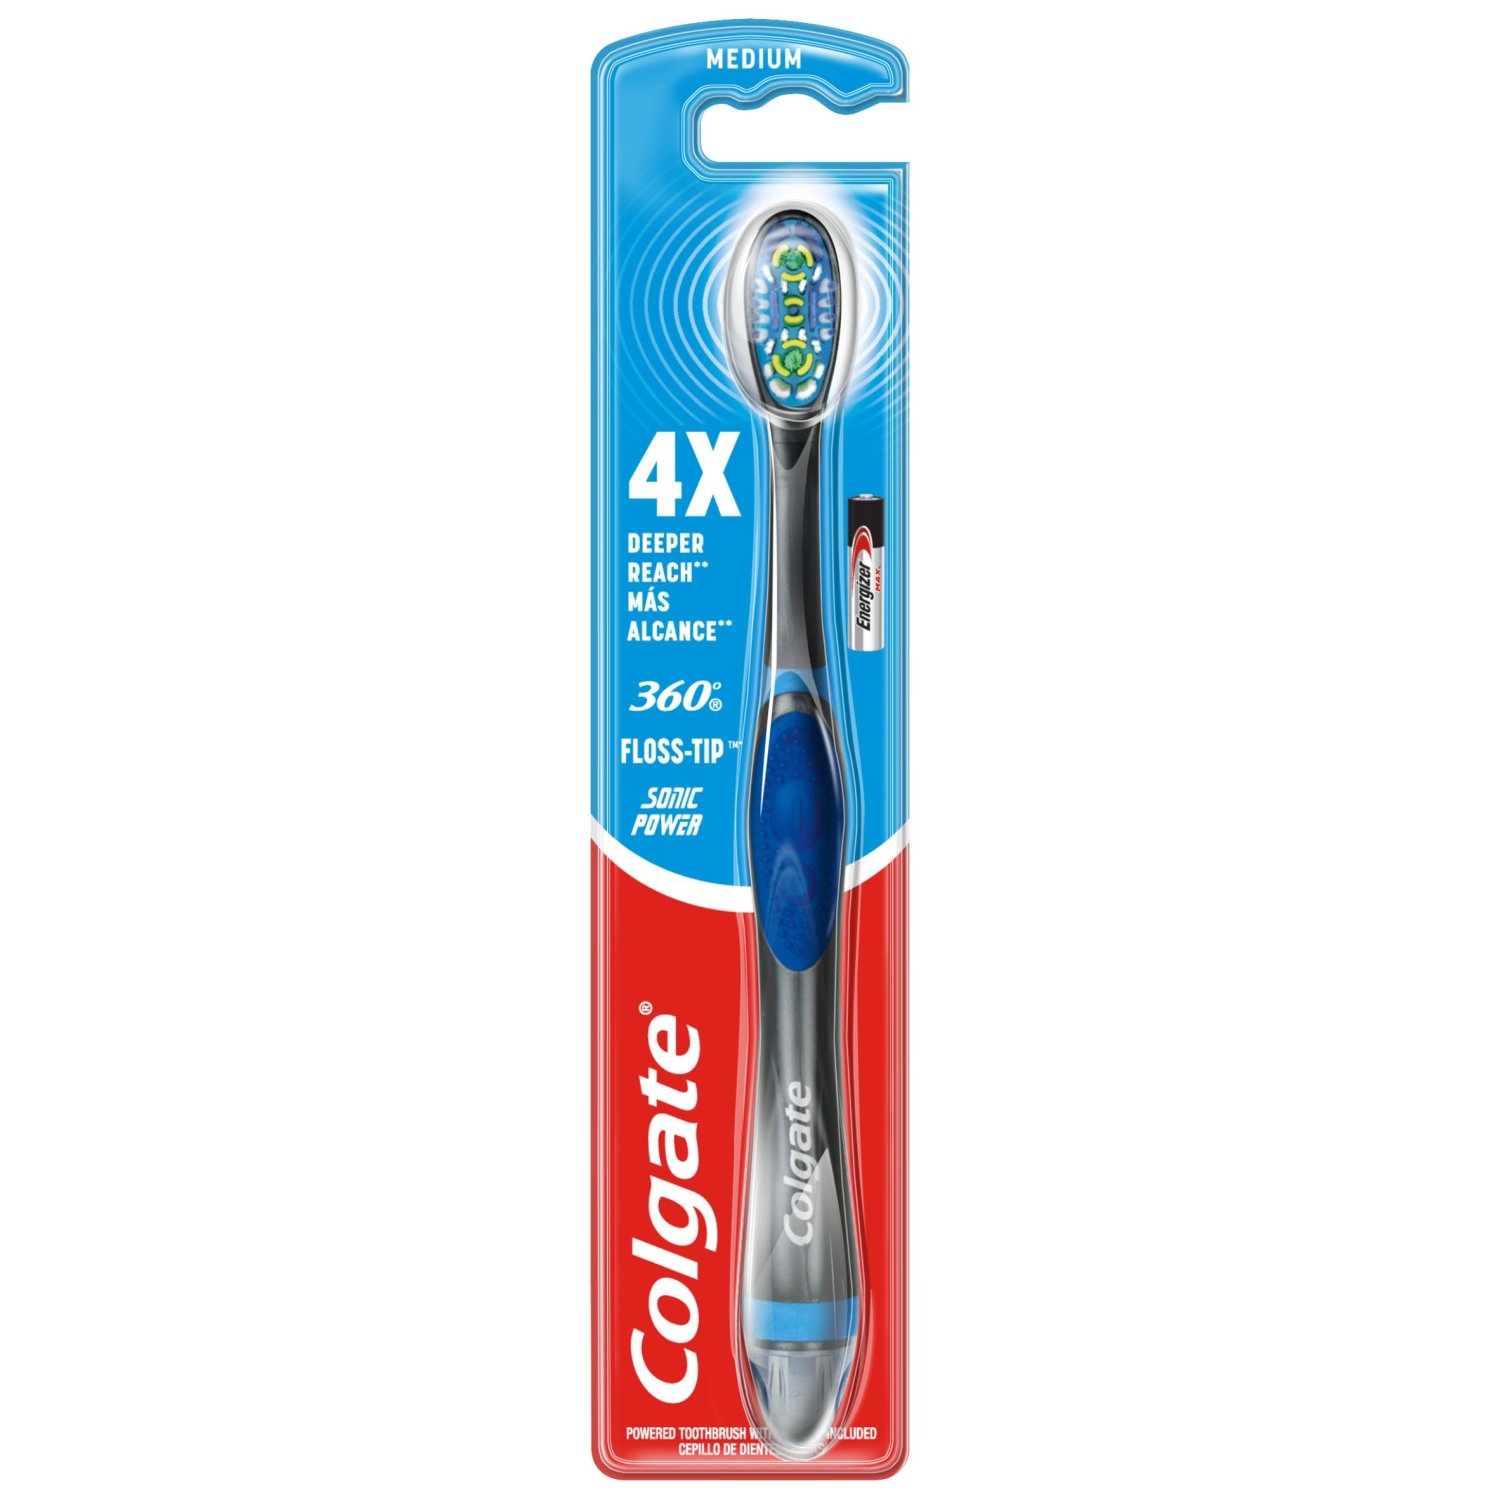 Enjoy a confident smile with the Colgate 360° Floss Tip Sonic Power Toothbrush. This battery toothbrush reaches 4x deeper below the gumline,* has an amazing 20,000 strokes a minute and a tongue and cheek cleaner**. * vs regular flat trim manual toothbrush **Cleans teeth, tongue, cheeks and gums